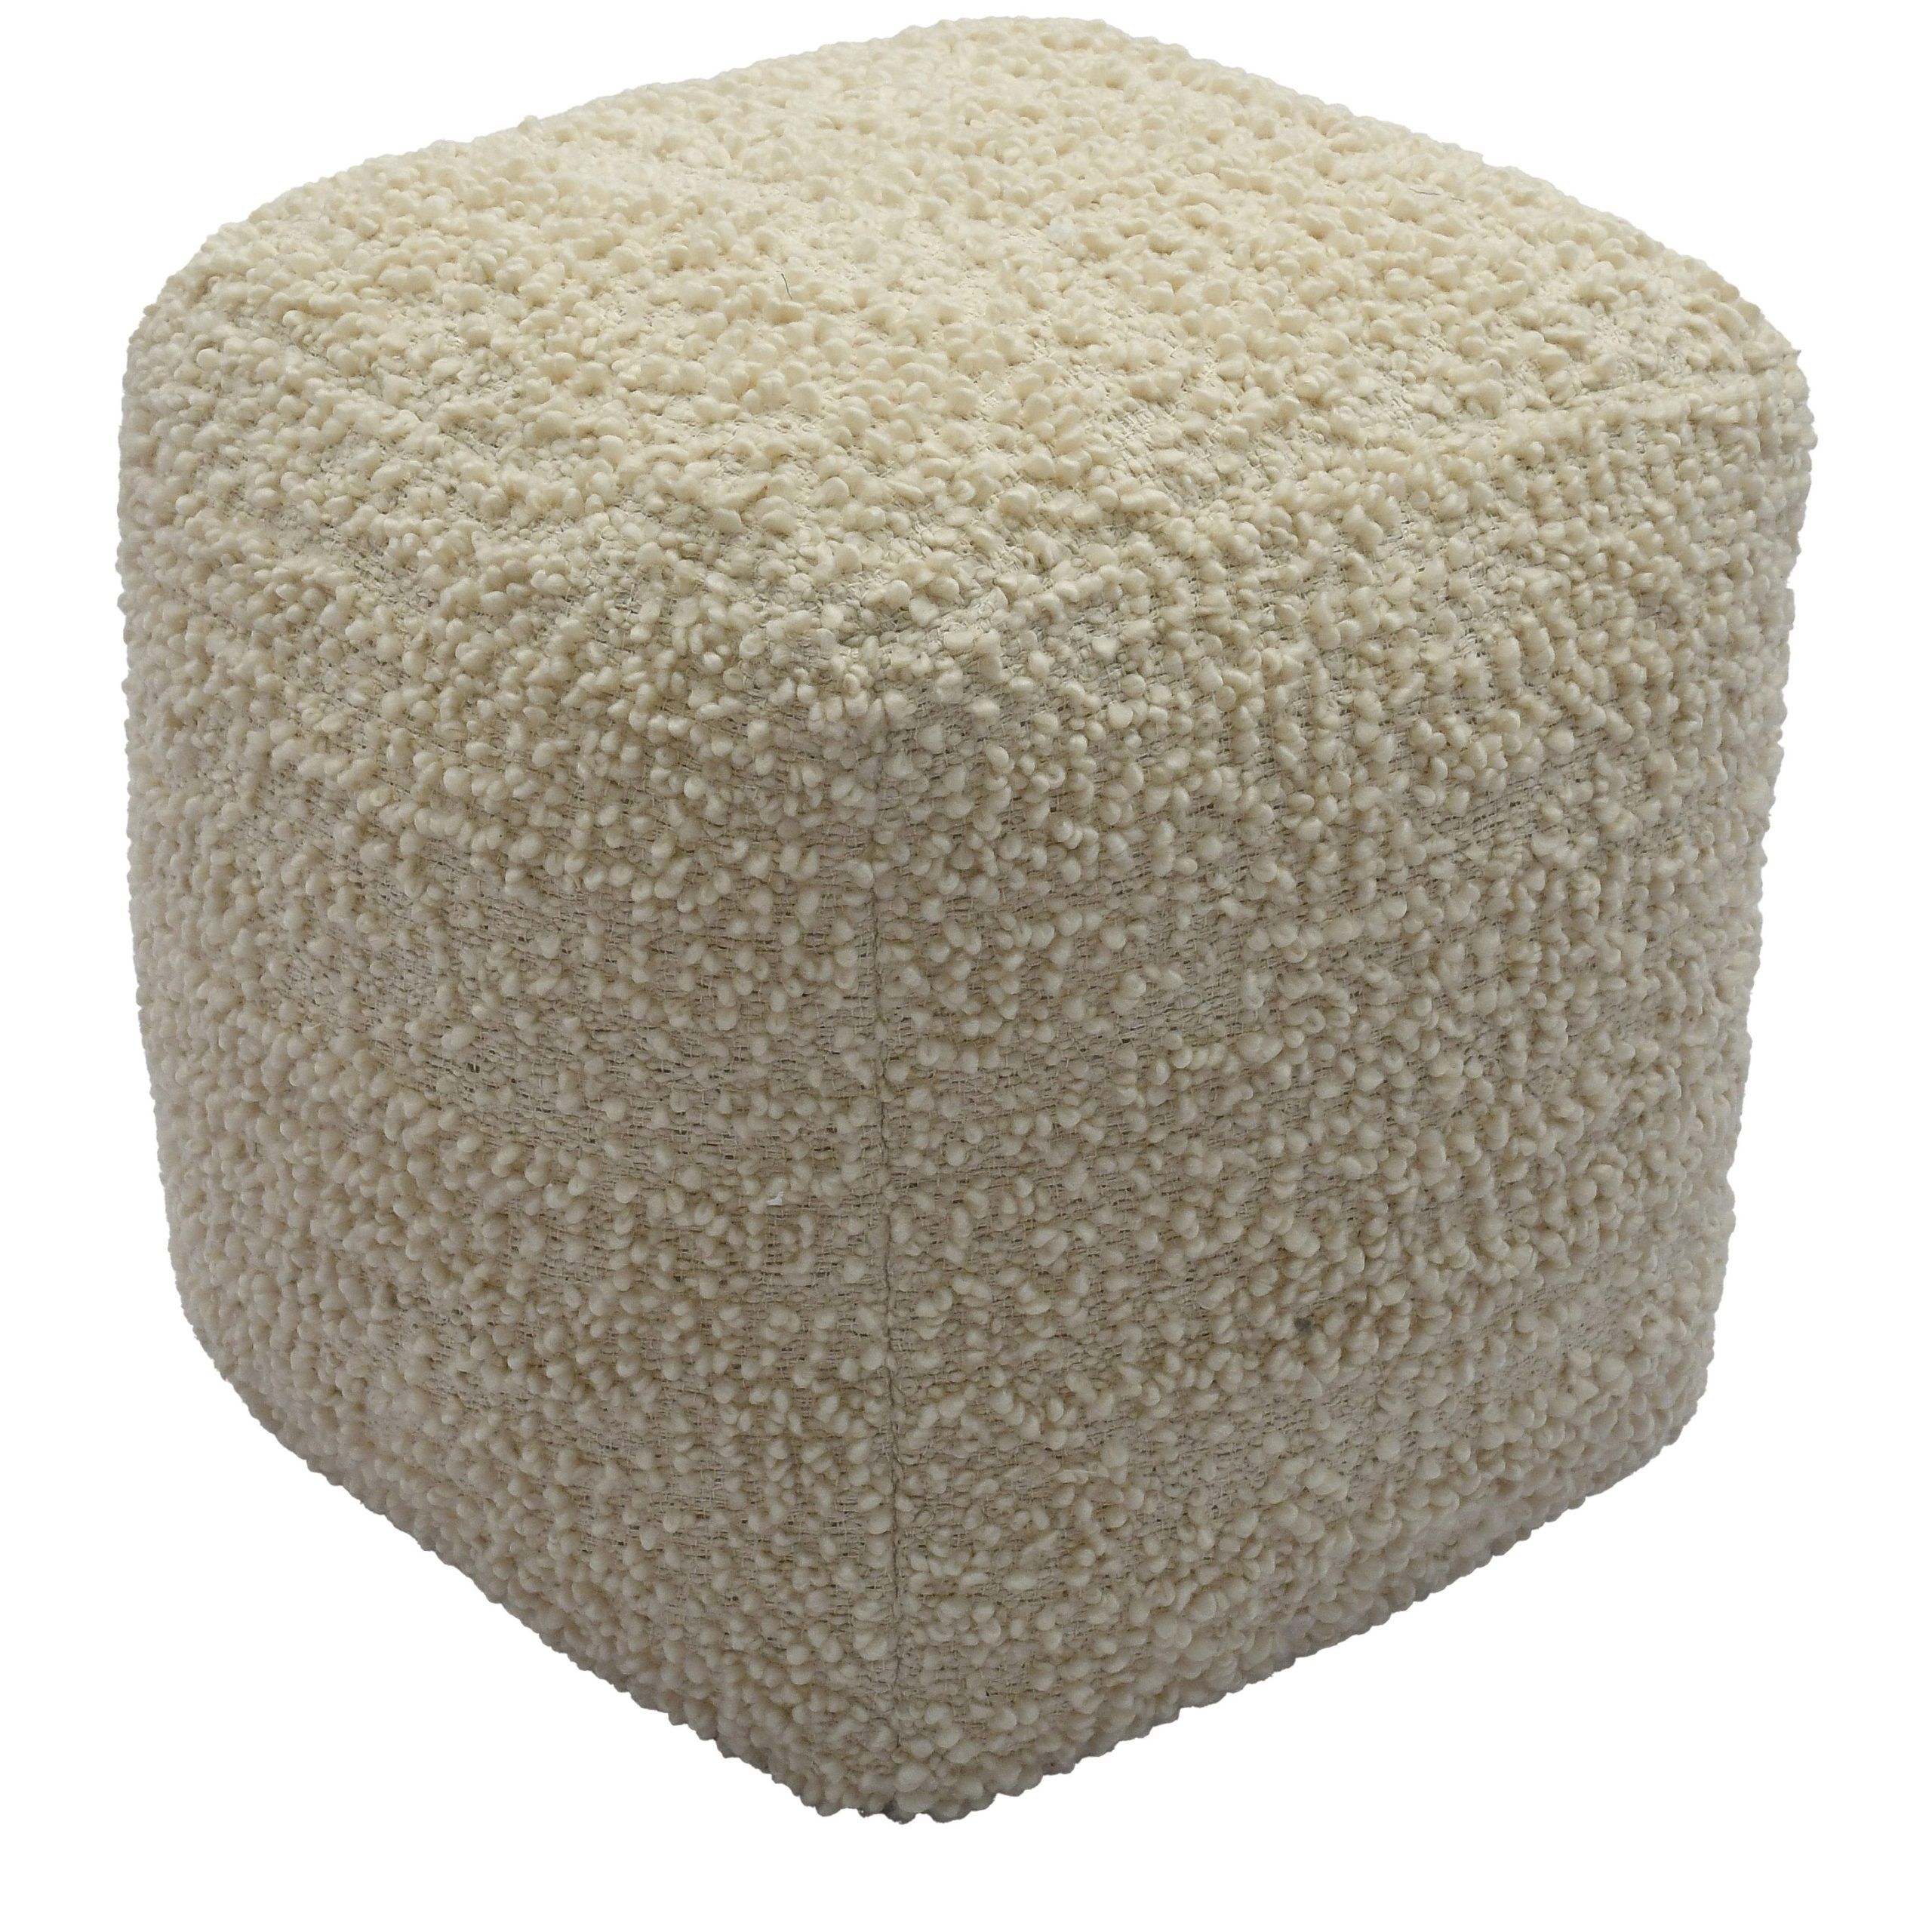 Off White Ottomans & Poufs At Lowes Intended For Off White Ottomans (View 15 of 15)